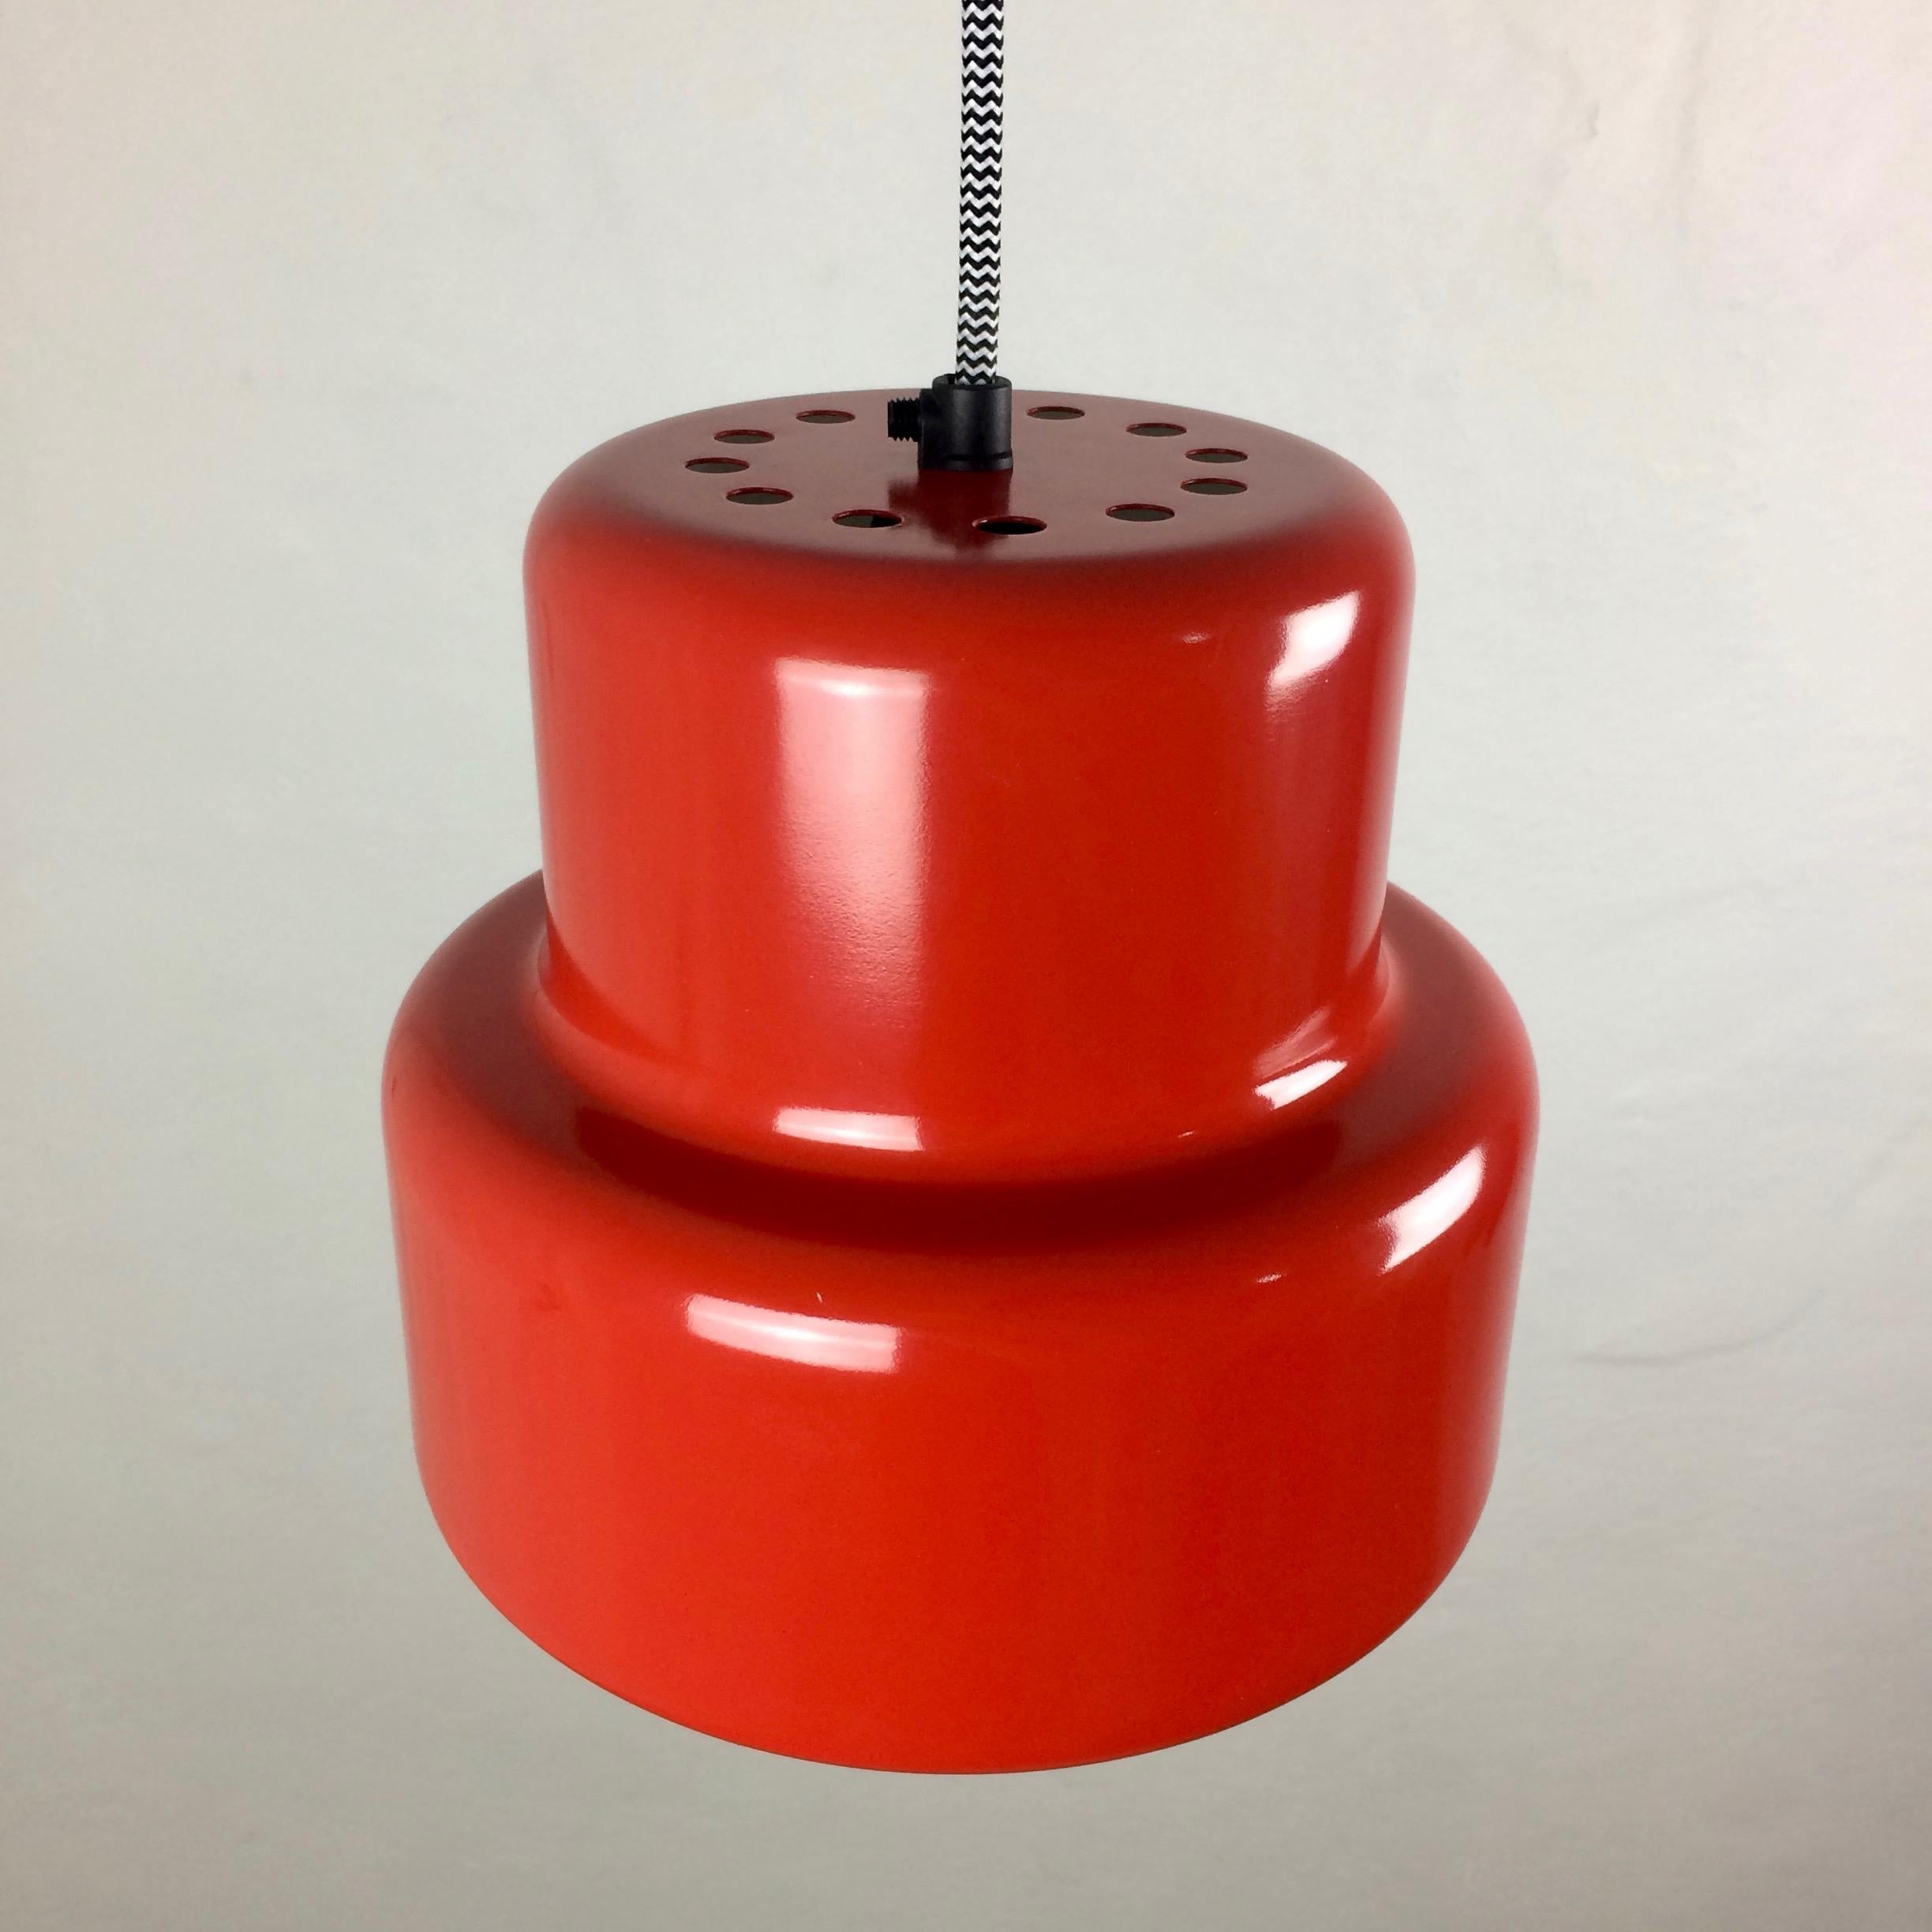 Poker mini pendant light, designed by internationally famed designer Jo Hammerborg for Fog & Mørup.

The color is a beautiful deep red and the condition is very good. Almost no signs of wear and tear.

Poker was available in versions 20 cm and